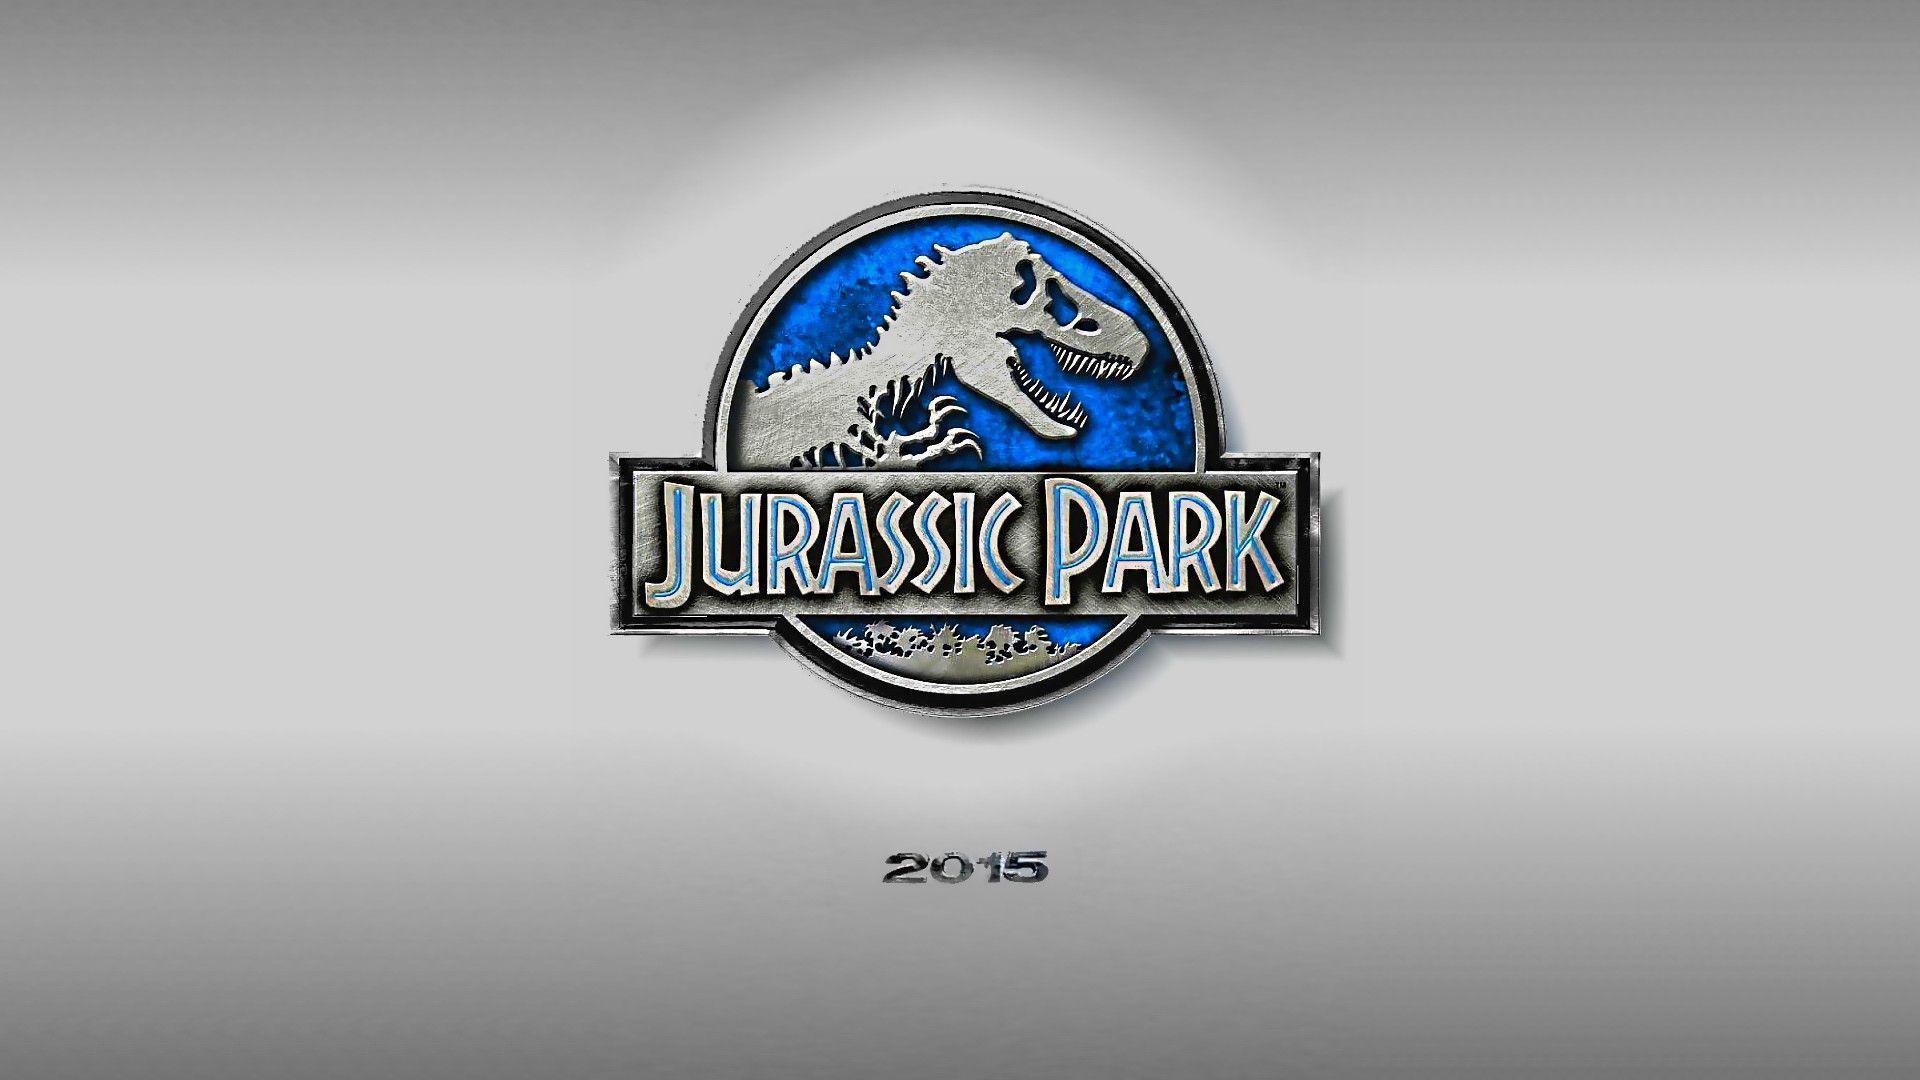 Jurassic Park 4 2015 Wallpapers hd backgrounds « HD Wallpapers